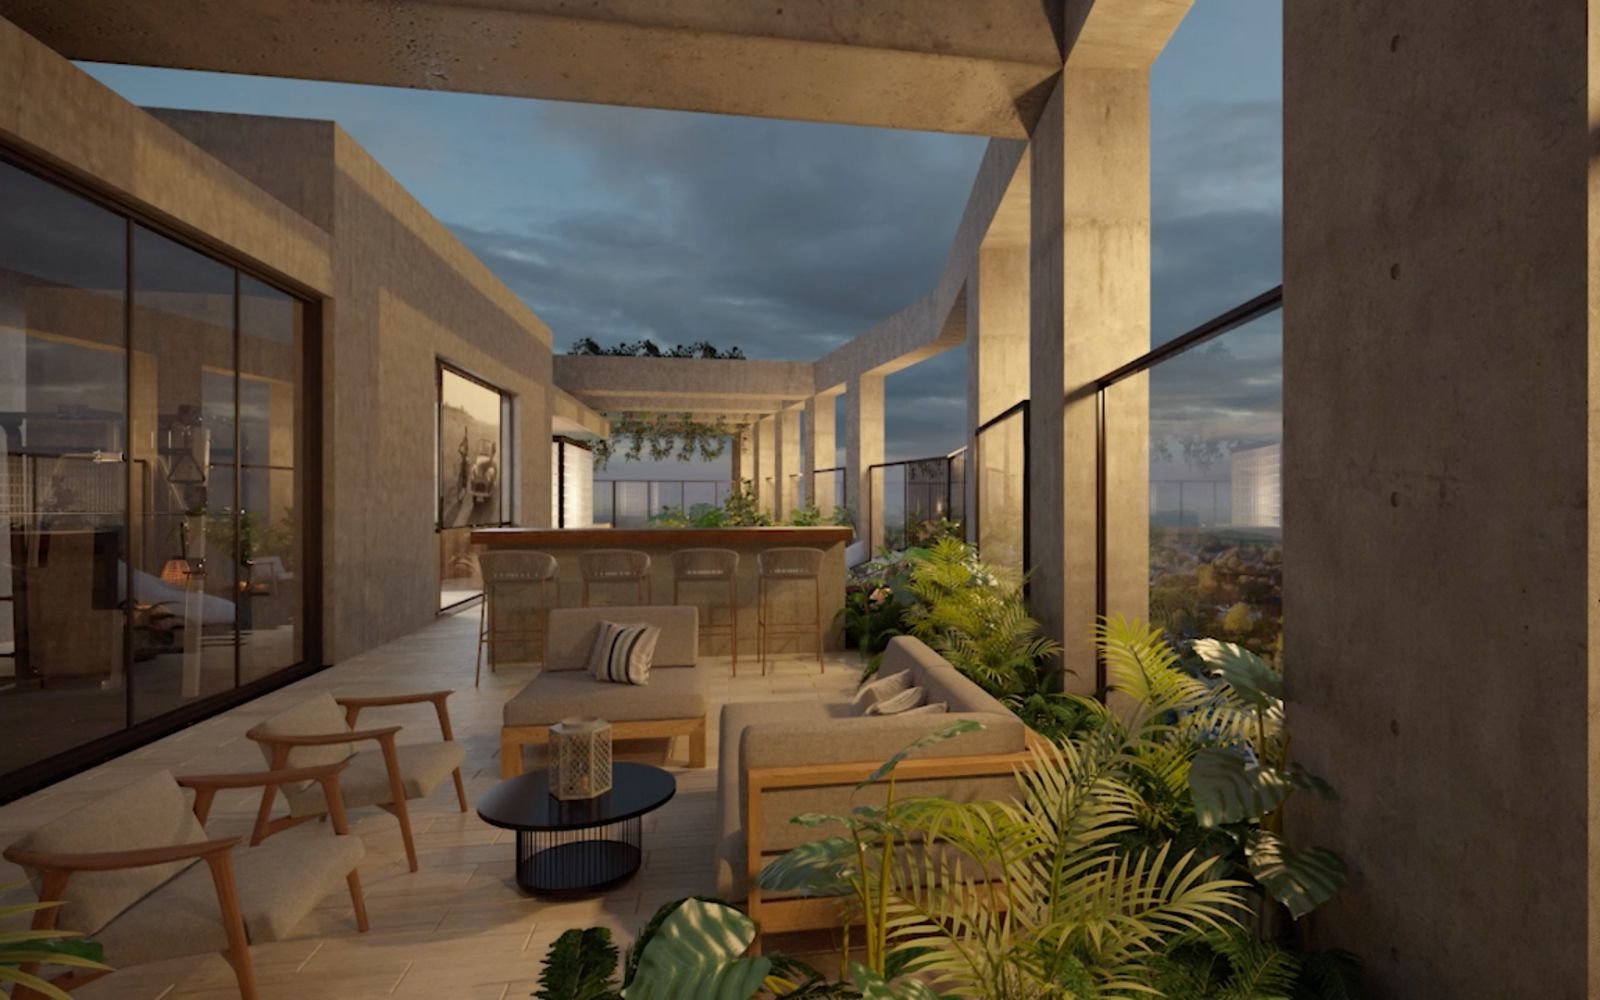 Luxury apartment with 30 amenities, 13,000 m2 of green areas, designed by renown architect firm, Fuentes del Pedregal, for sale Mexico City